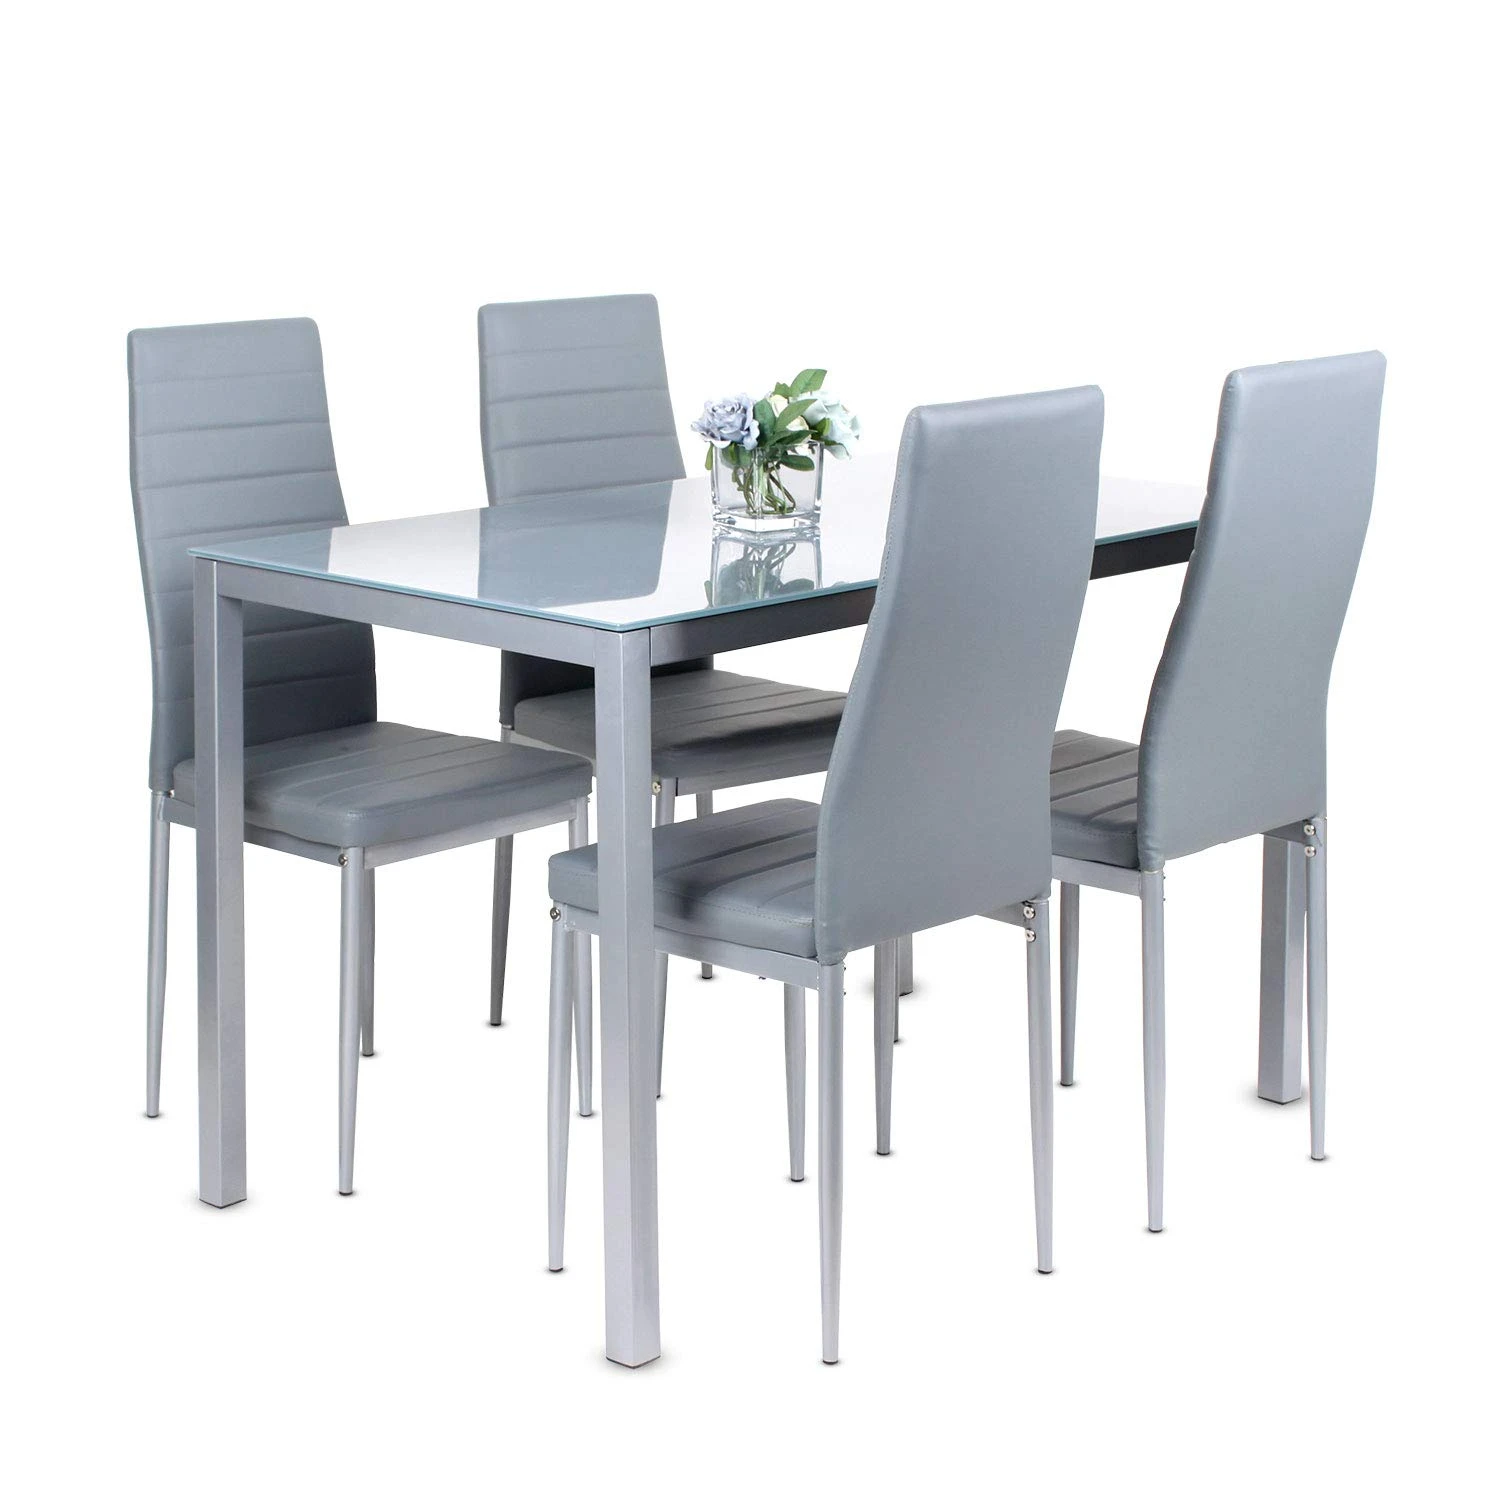 Hot selling grey table sets 6 chairs dining tables set dinning room furniture sets chair